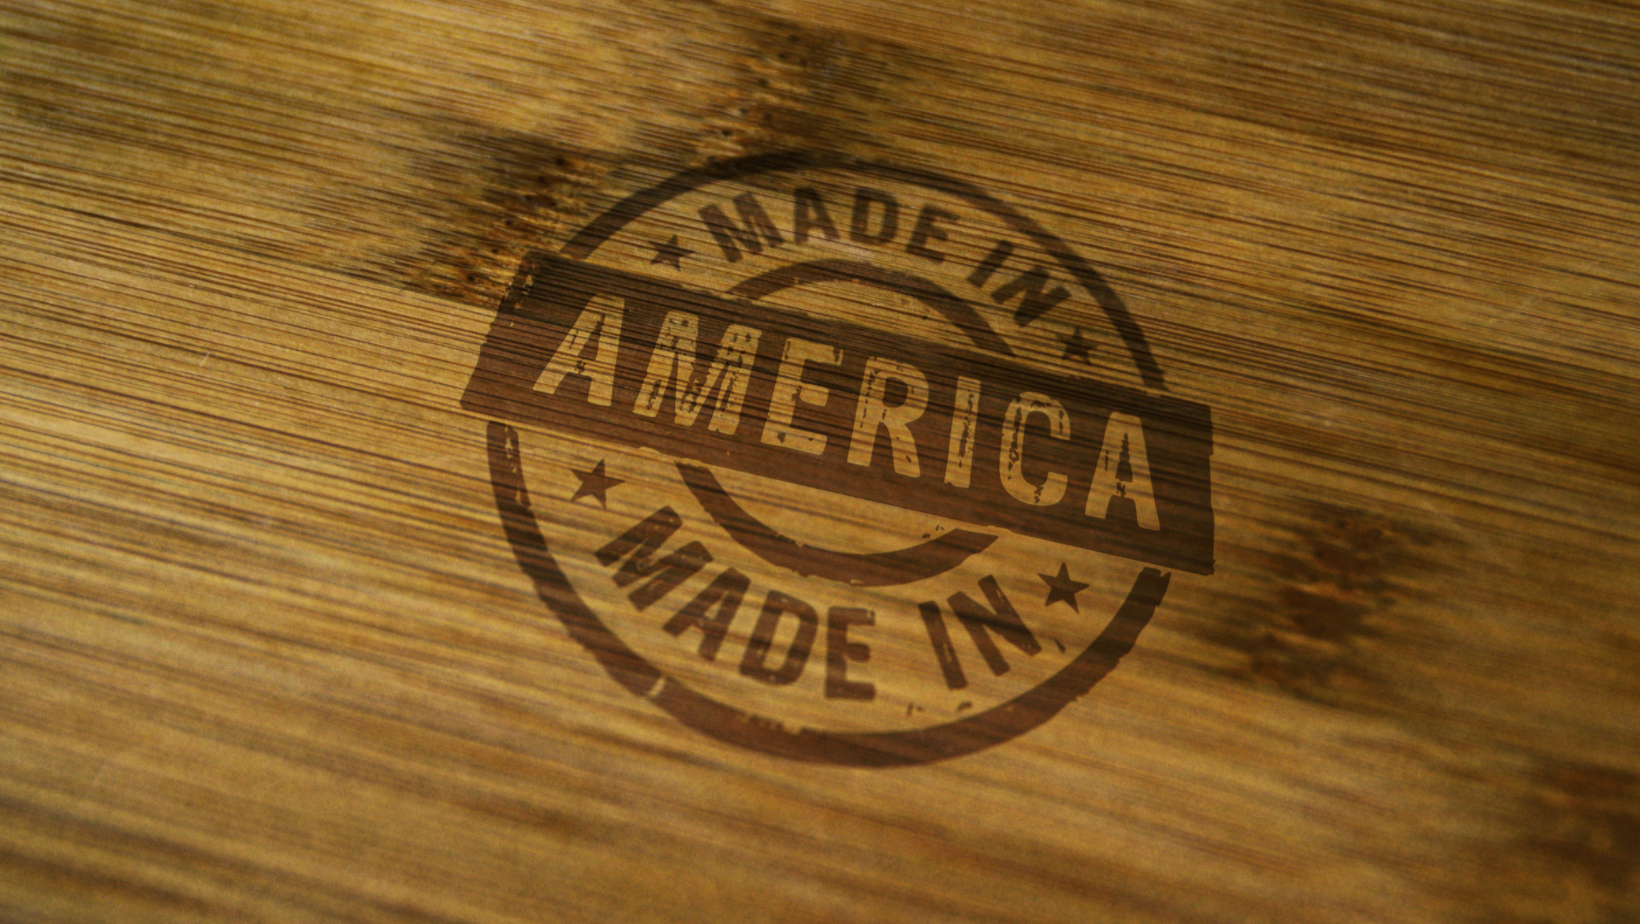 American Made Kitchen Innovation